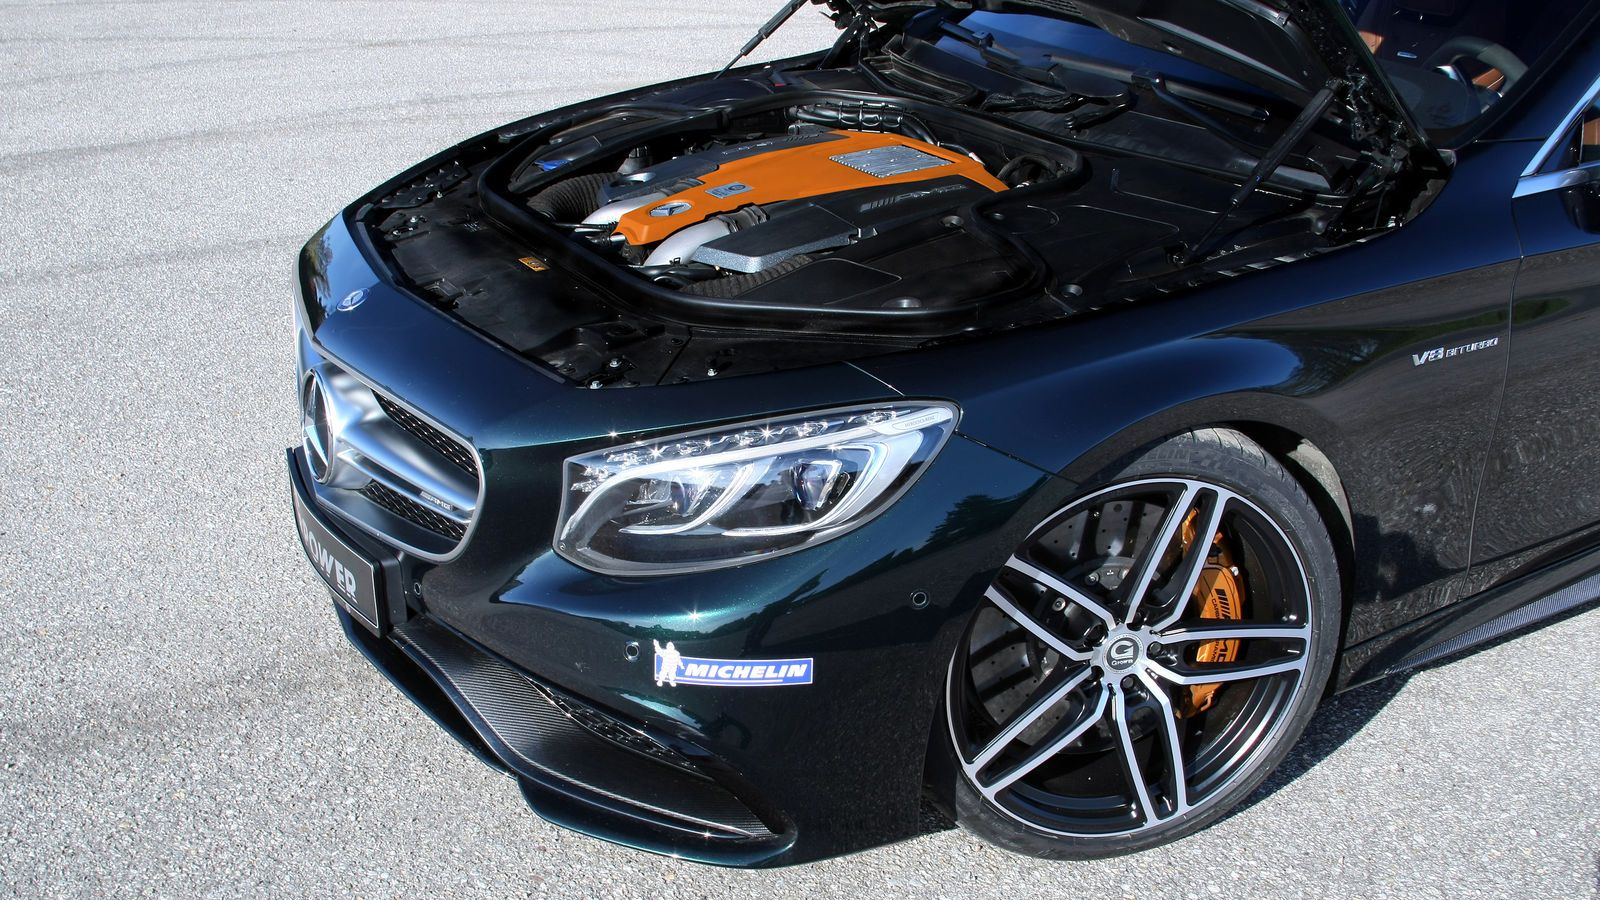 Тюнинг Mercedes-Benz S63 AMG Coupe от G-Power